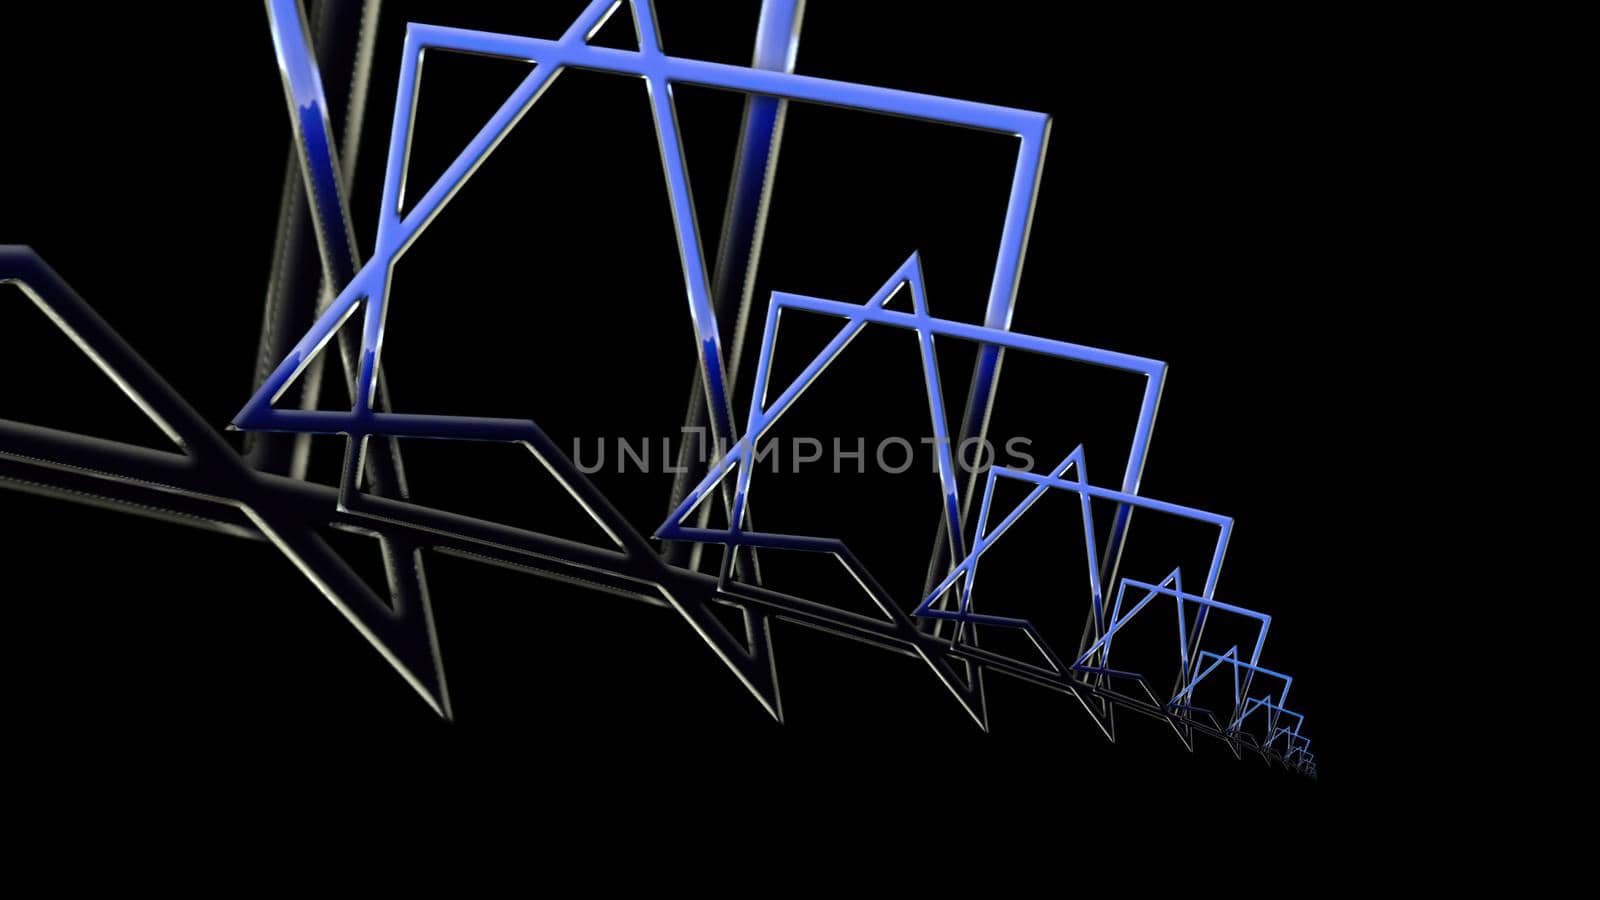 3d illustration - triangles and geometric patterns of blue lines on a black background